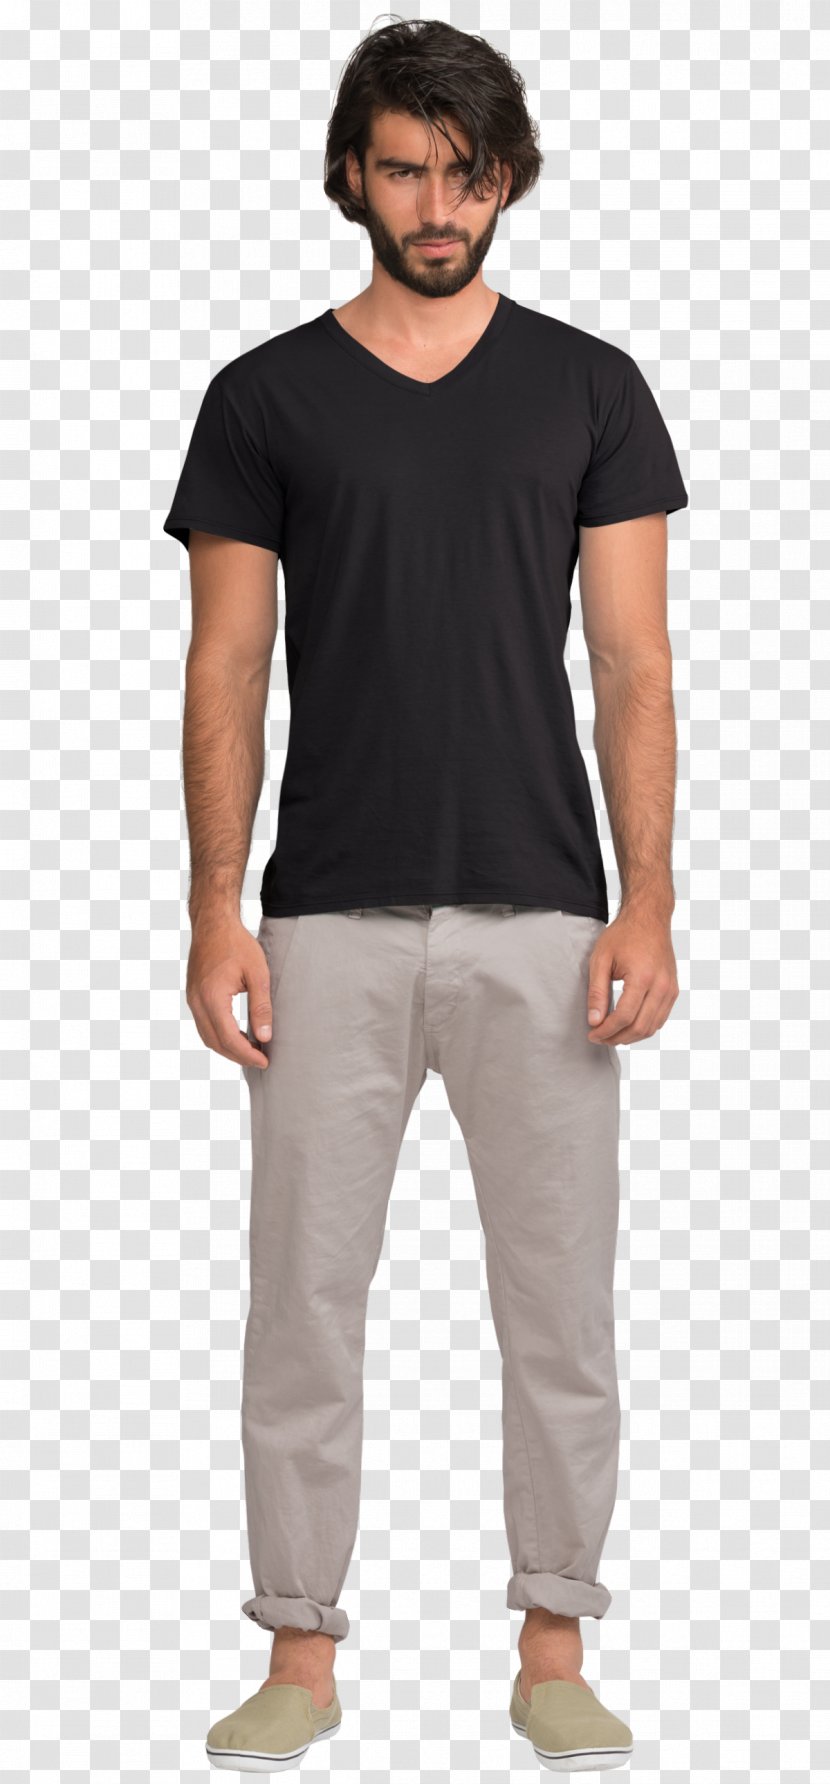 T-shirt Clothing Top Amazon.com - Walter White Transparent PNG